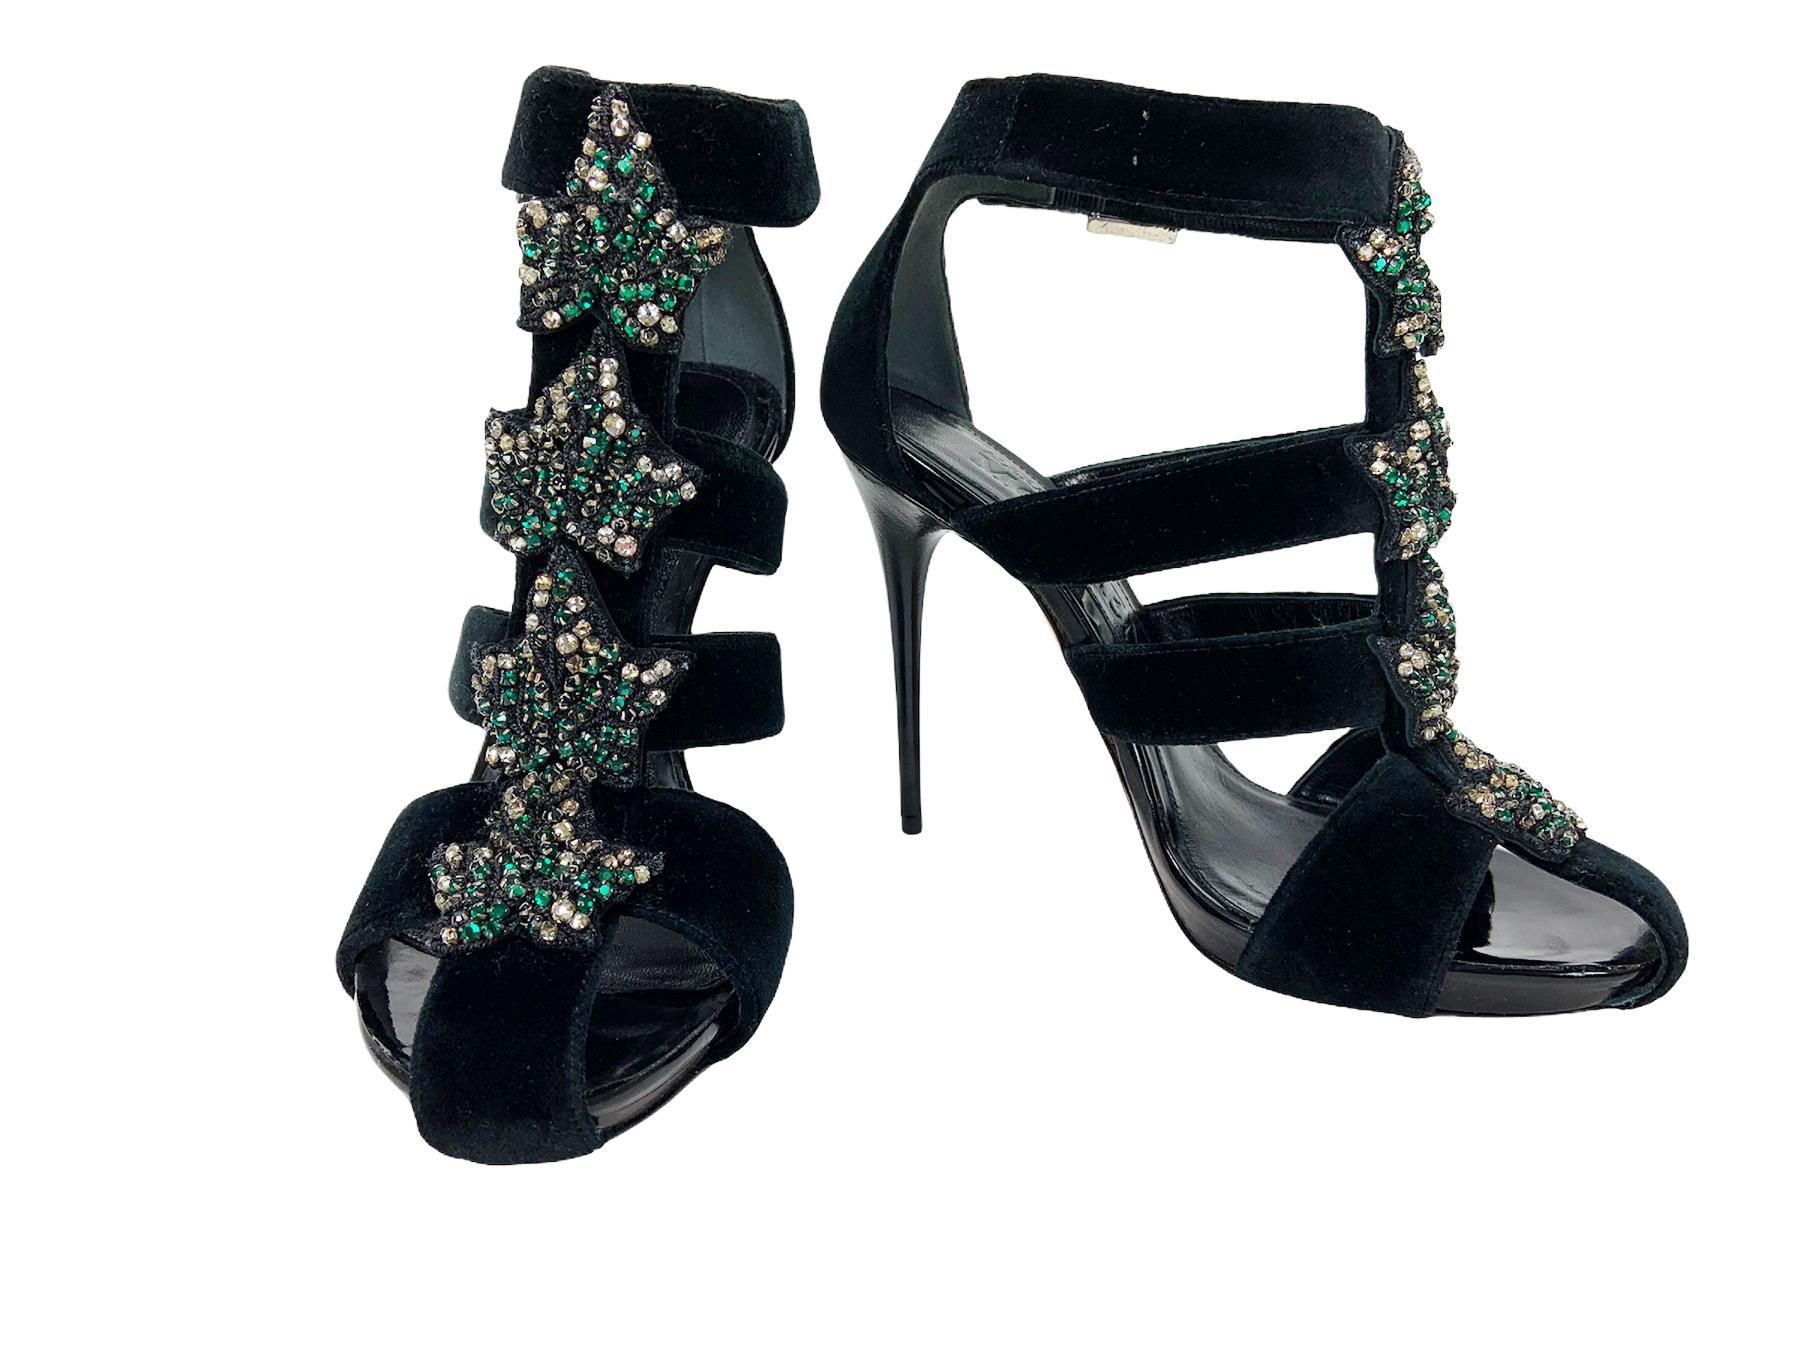 New Alexander McQueen *Ofelia* Black Velvet Crystal Embellished Cage Sandals
Designer size - 37.5
Ivy Embroidery, Emerald Green and Clear Swarovski Crystals, Black Velvet, Buckle Closure, Leather Sole & Insole.
Heel Height - 4.5 inches, Platform -